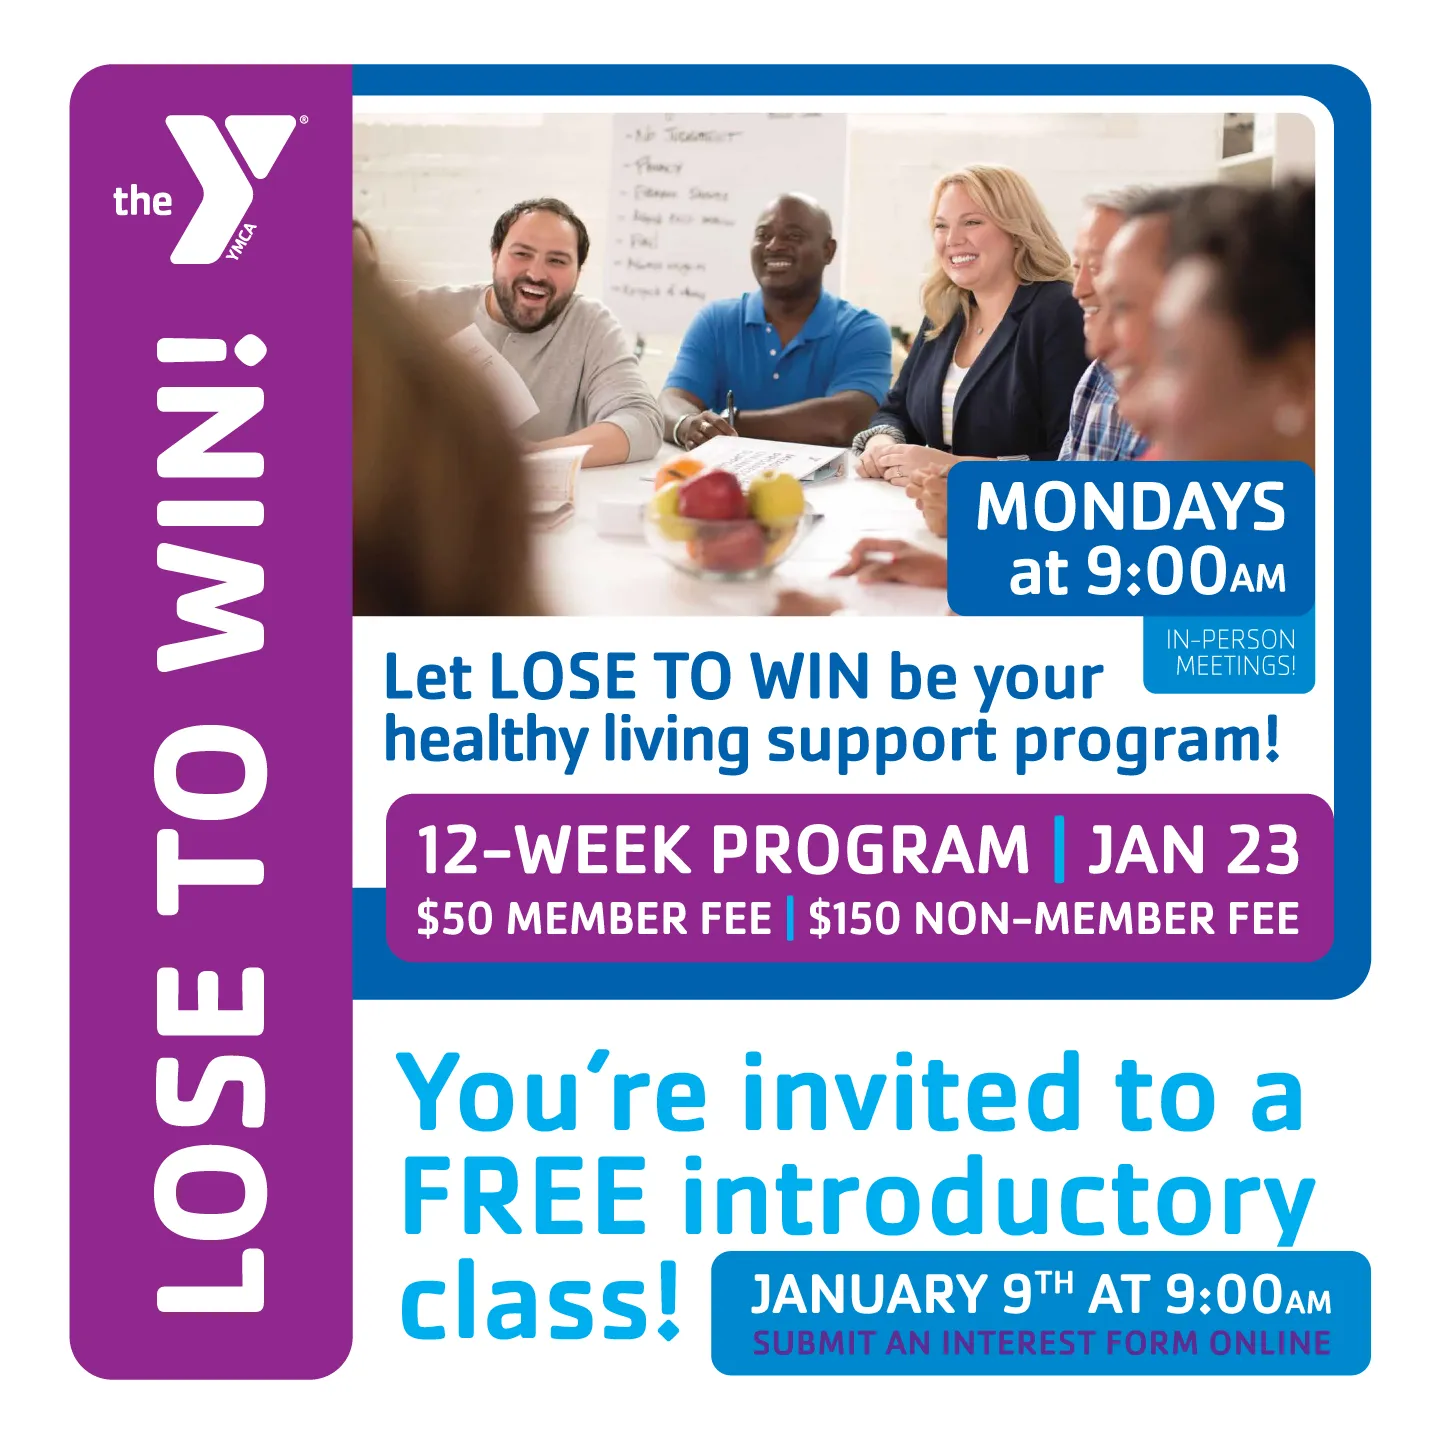 Let LOSE TO WIN be your healthy living support program! Free intro class Jan 9 at 9AM.